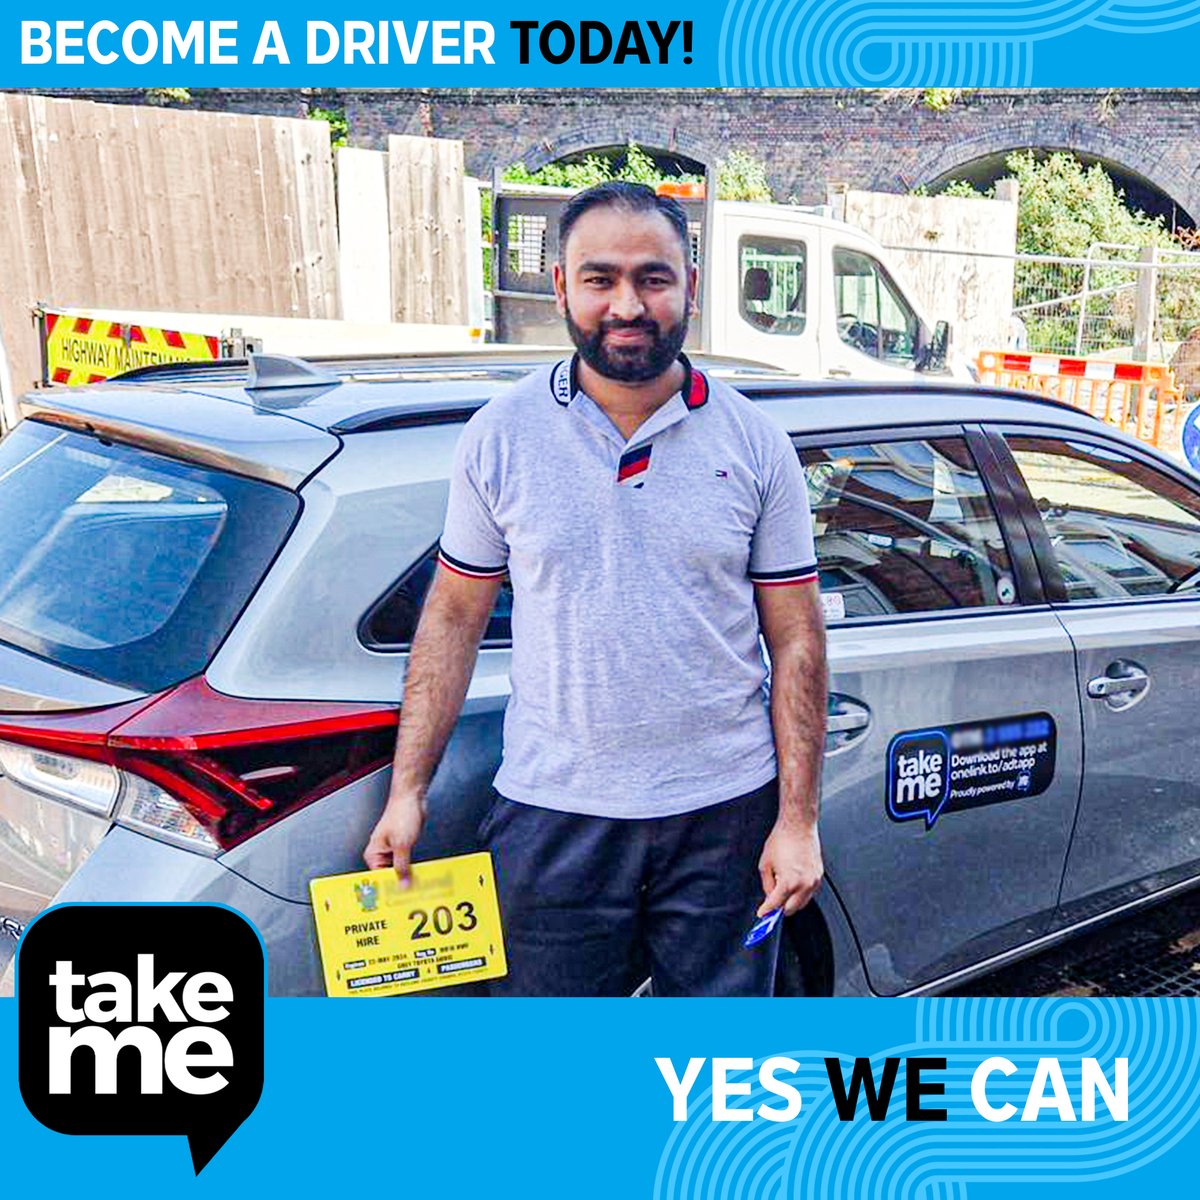 Hit the road with Take Me Private Hire! We're recruiting drivers who are passionate about providing excellent service. Join us and enjoy great perks and benefits. If this sounds of interest to you then apply today. APPLY HERE: drive.takeme.taxi #TakeMe #Taxi #Driver